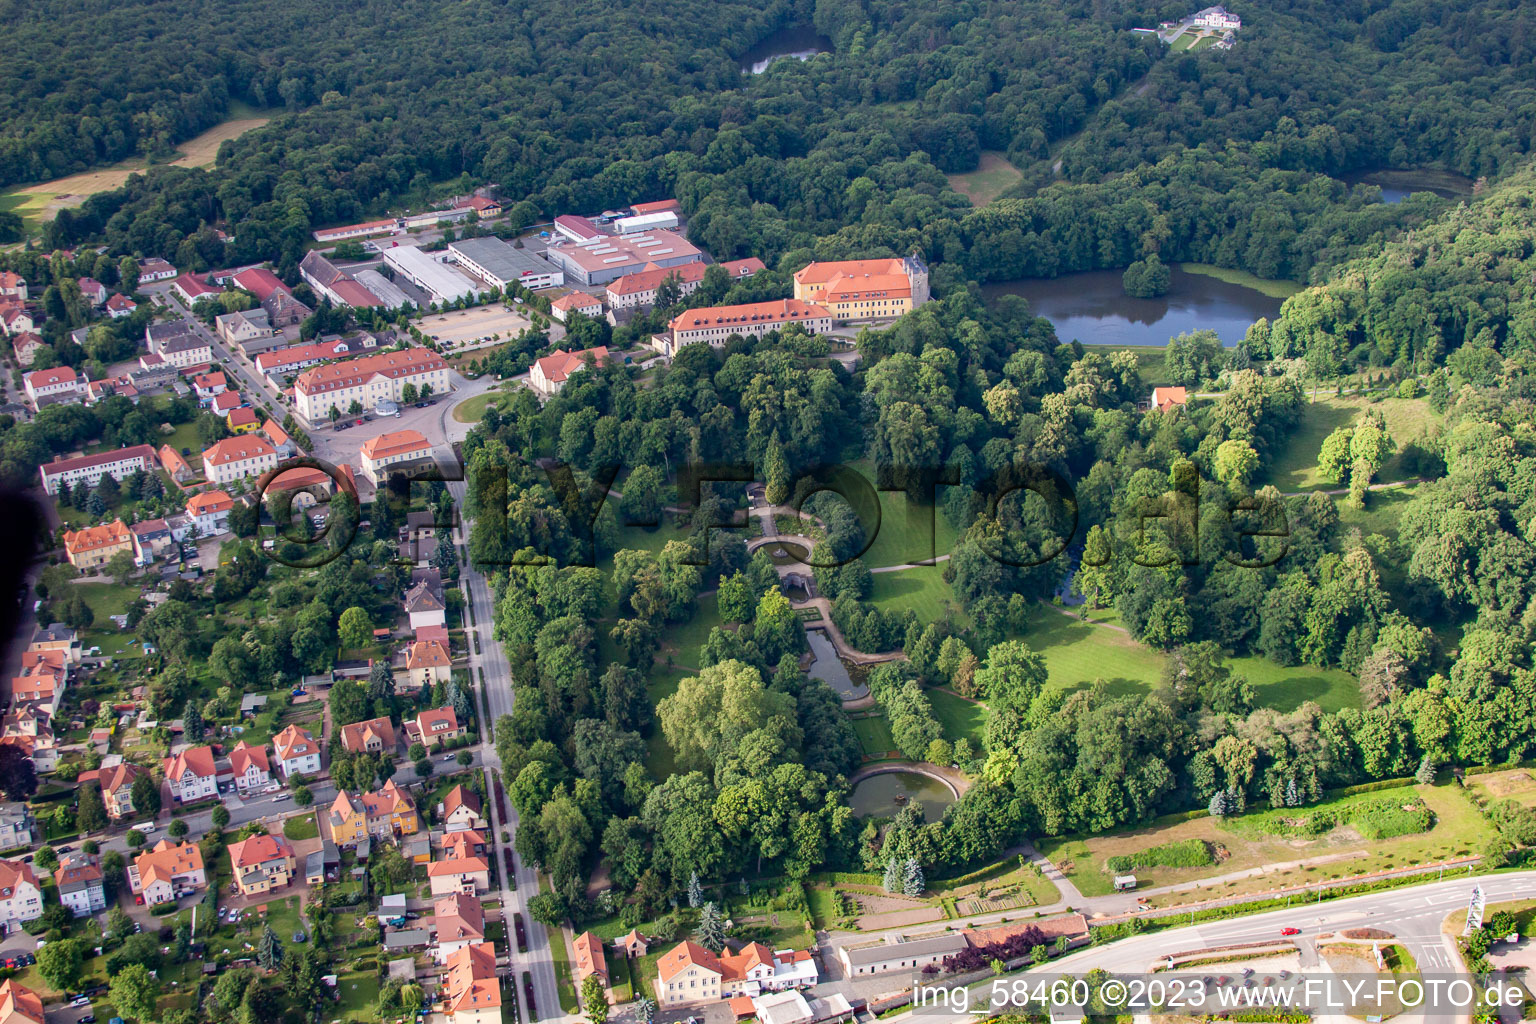 Aerial view of Castle and park in Ballenstedt in the state Saxony-Anhalt, Germany